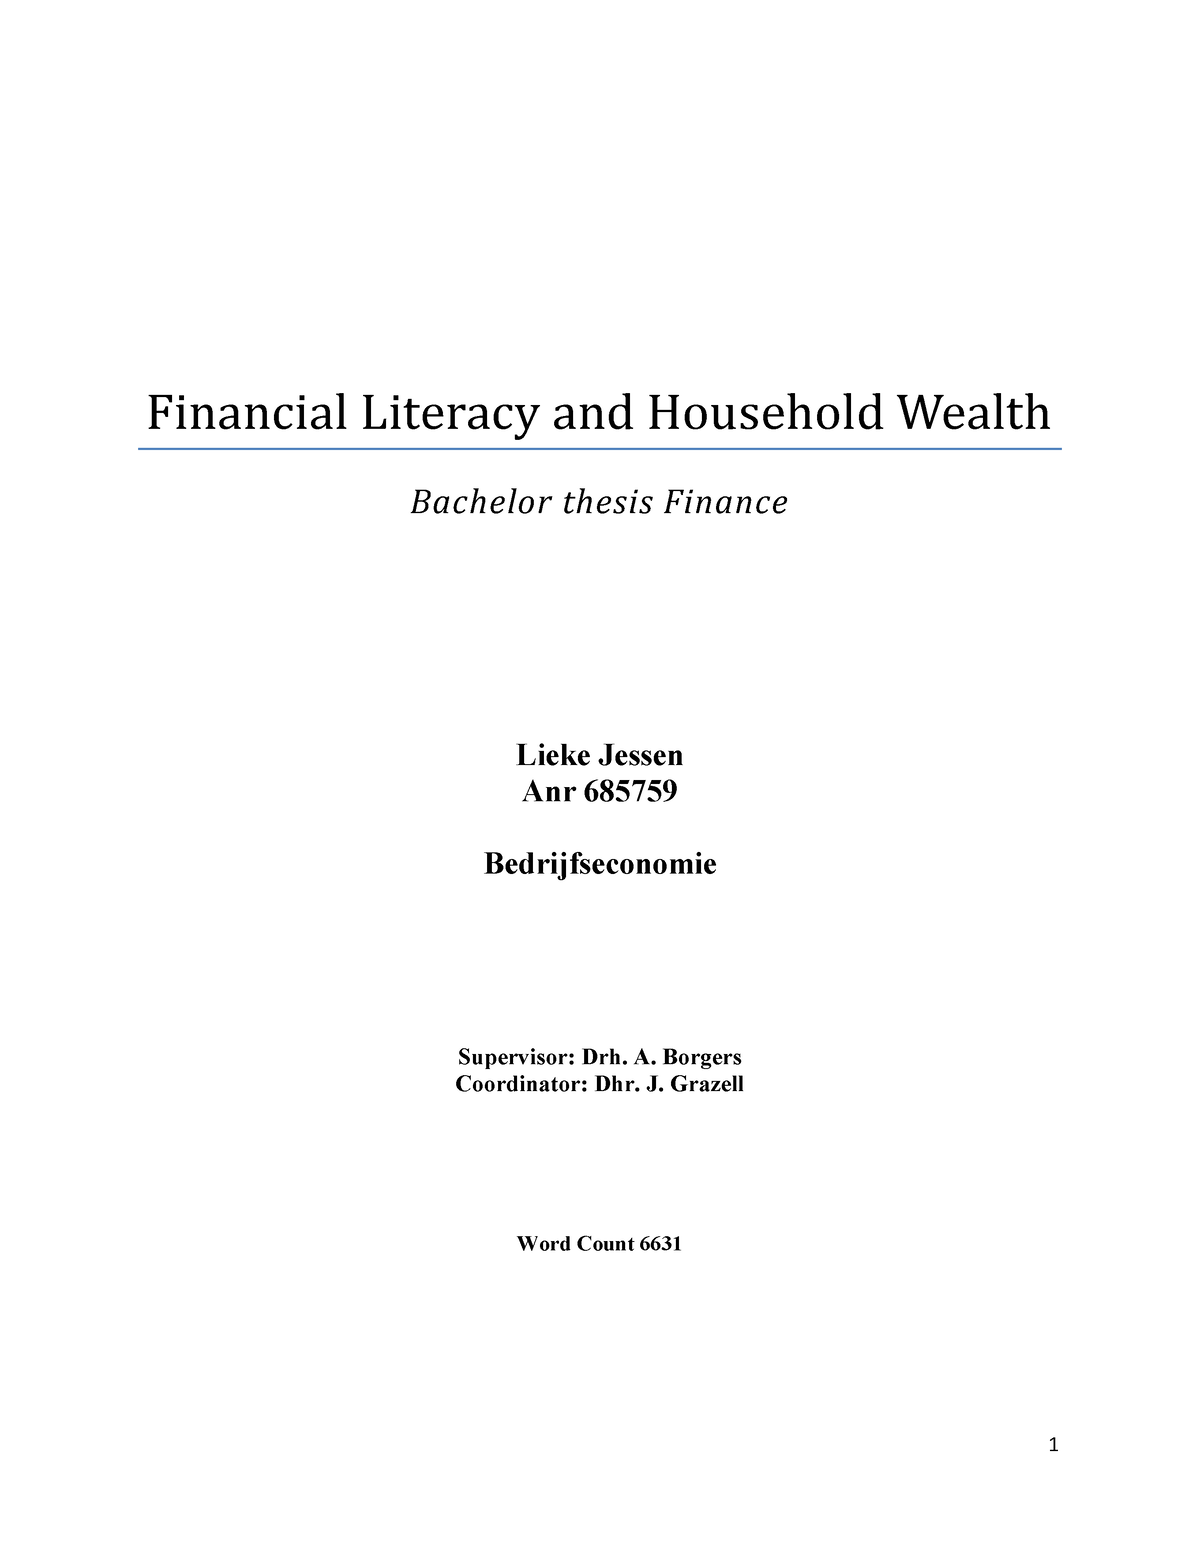 thesis on household finance